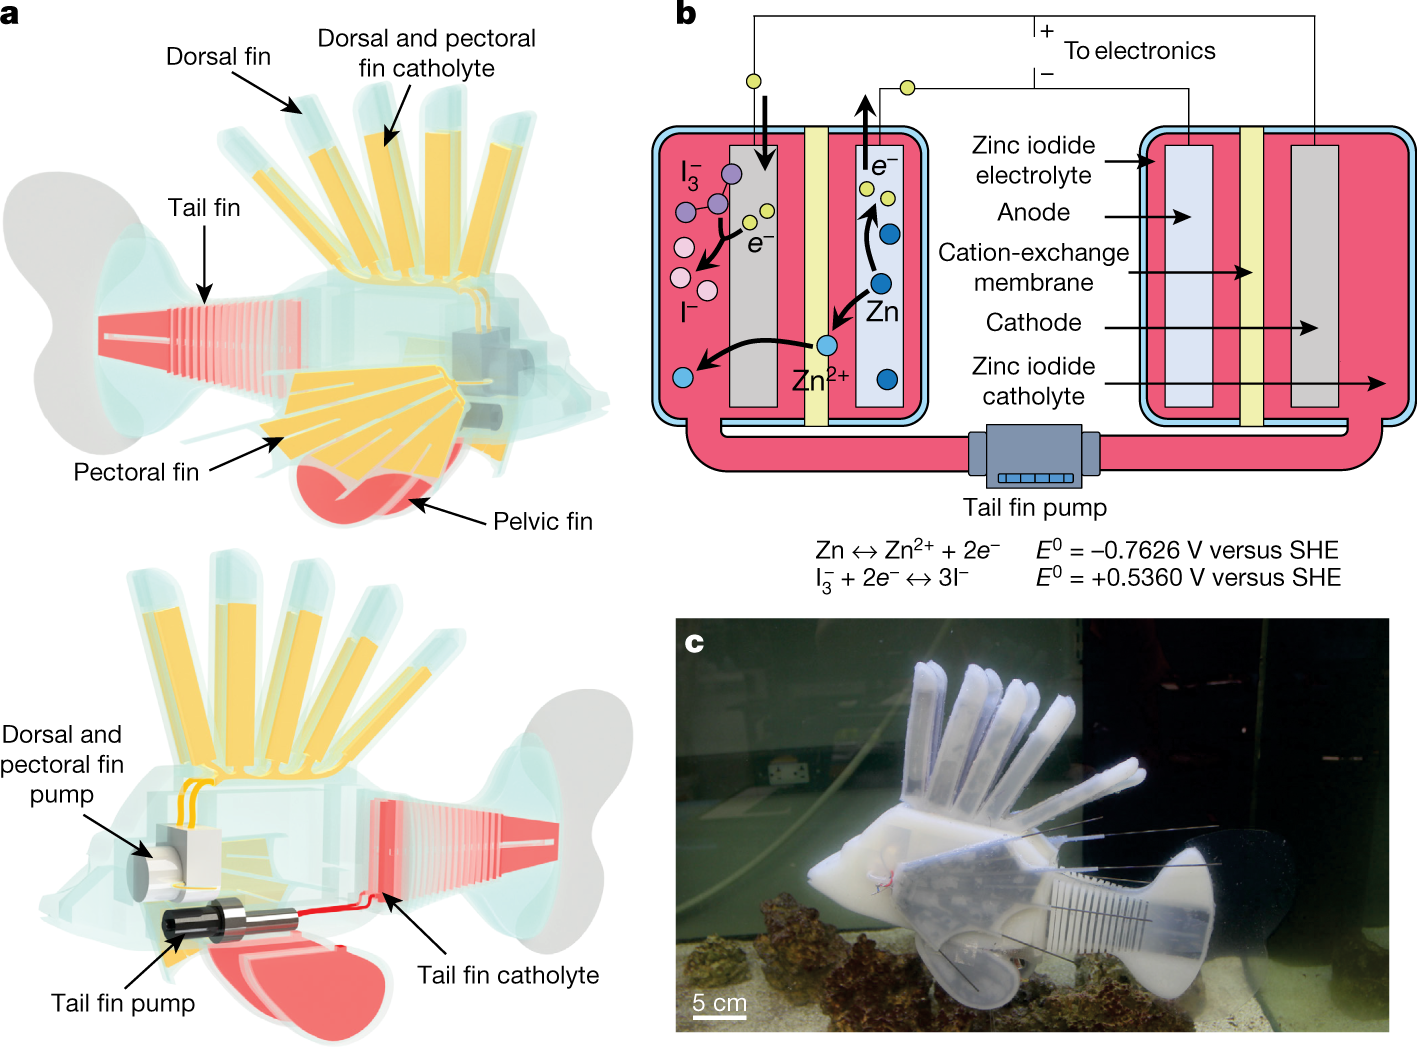 Mechanical and hardware configurations of the robotic fish: (a